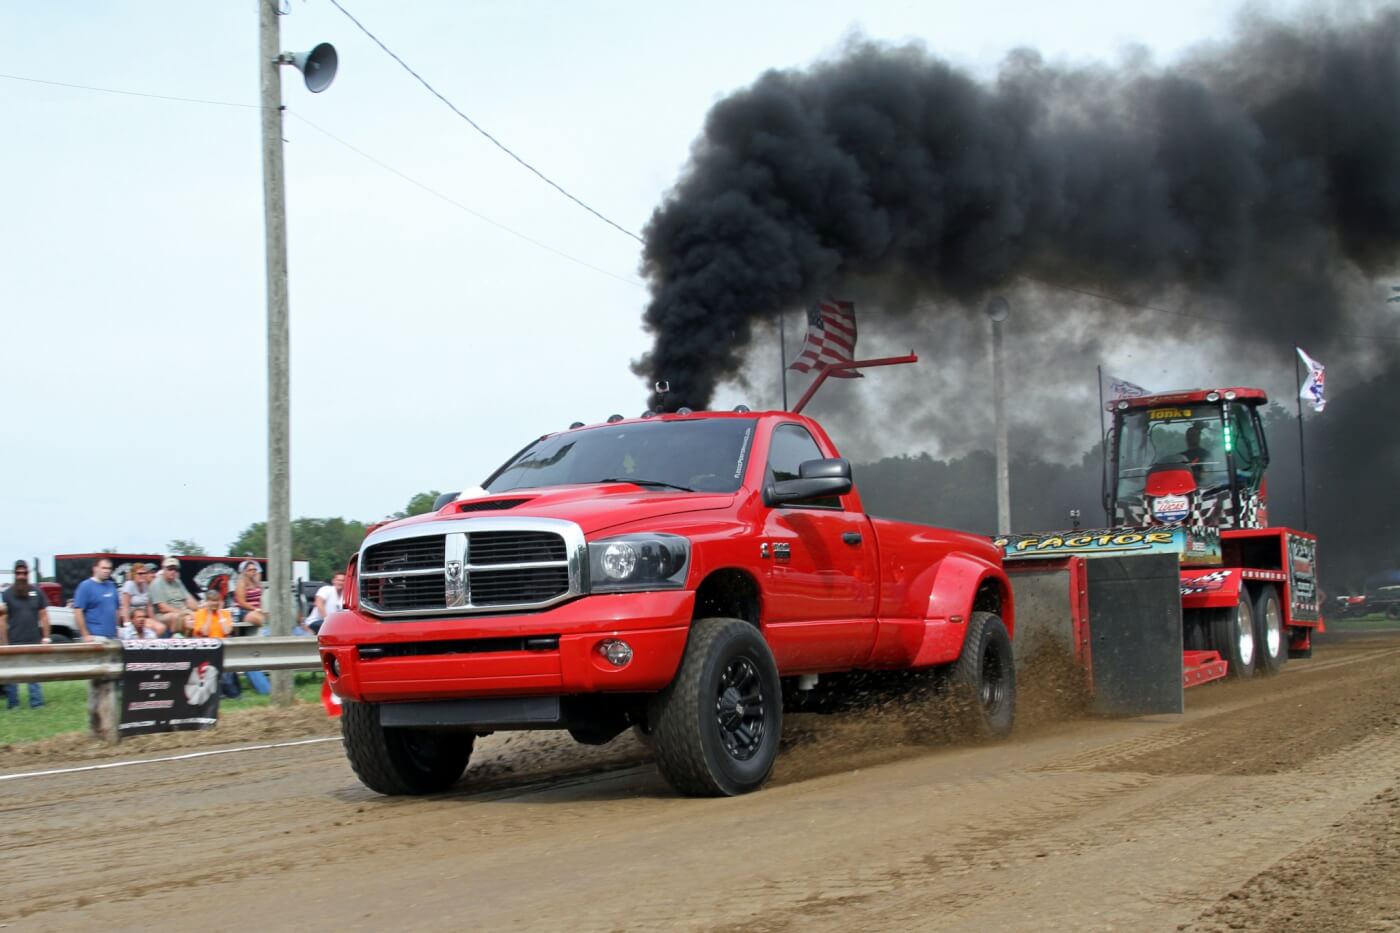 Kolin Dunn’s Dodge looked great on the way to his first place finish in the Hot Work Stock class.